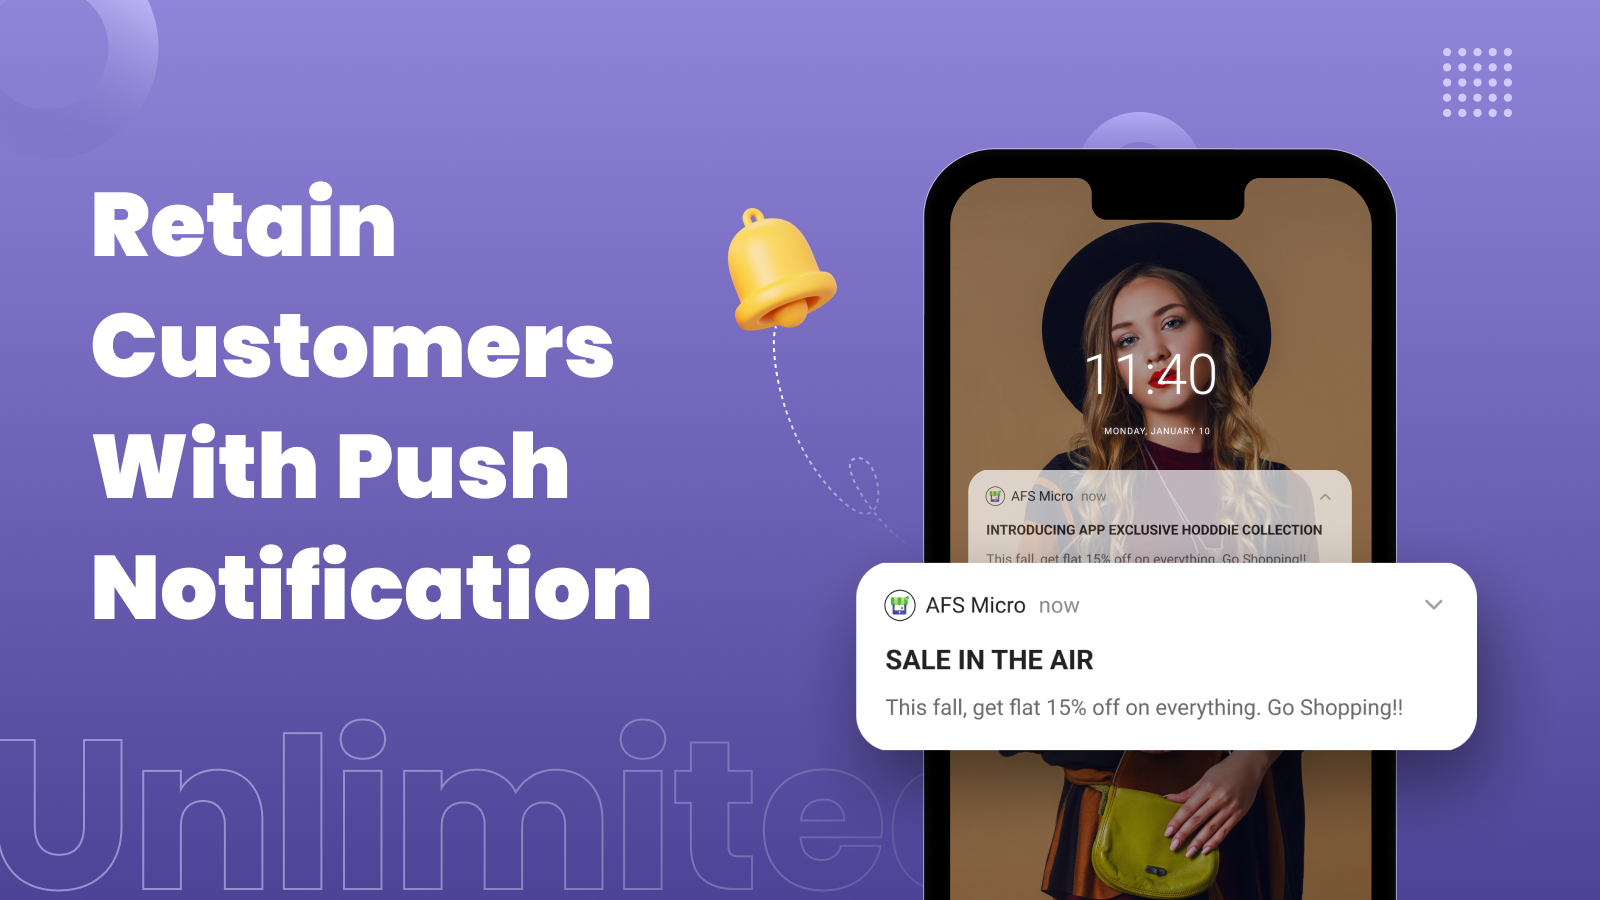 Retain customers with push notification